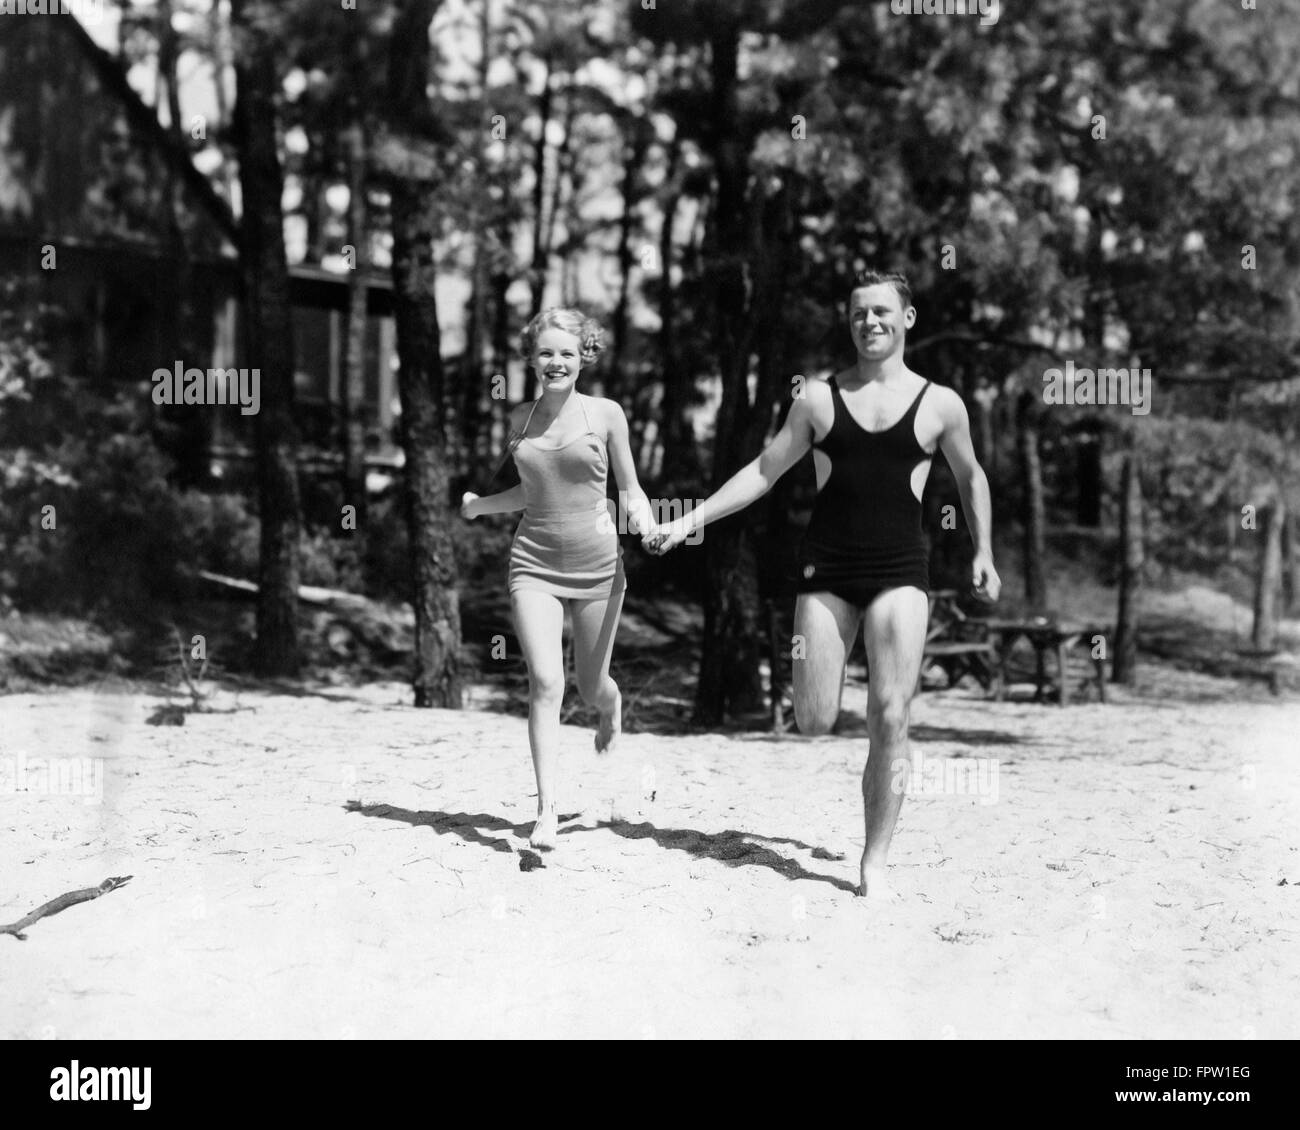 1930s COUPLE WEARING BATHING SUITS HOLDING HANDS RUNNING ON BEACH Stock Photo